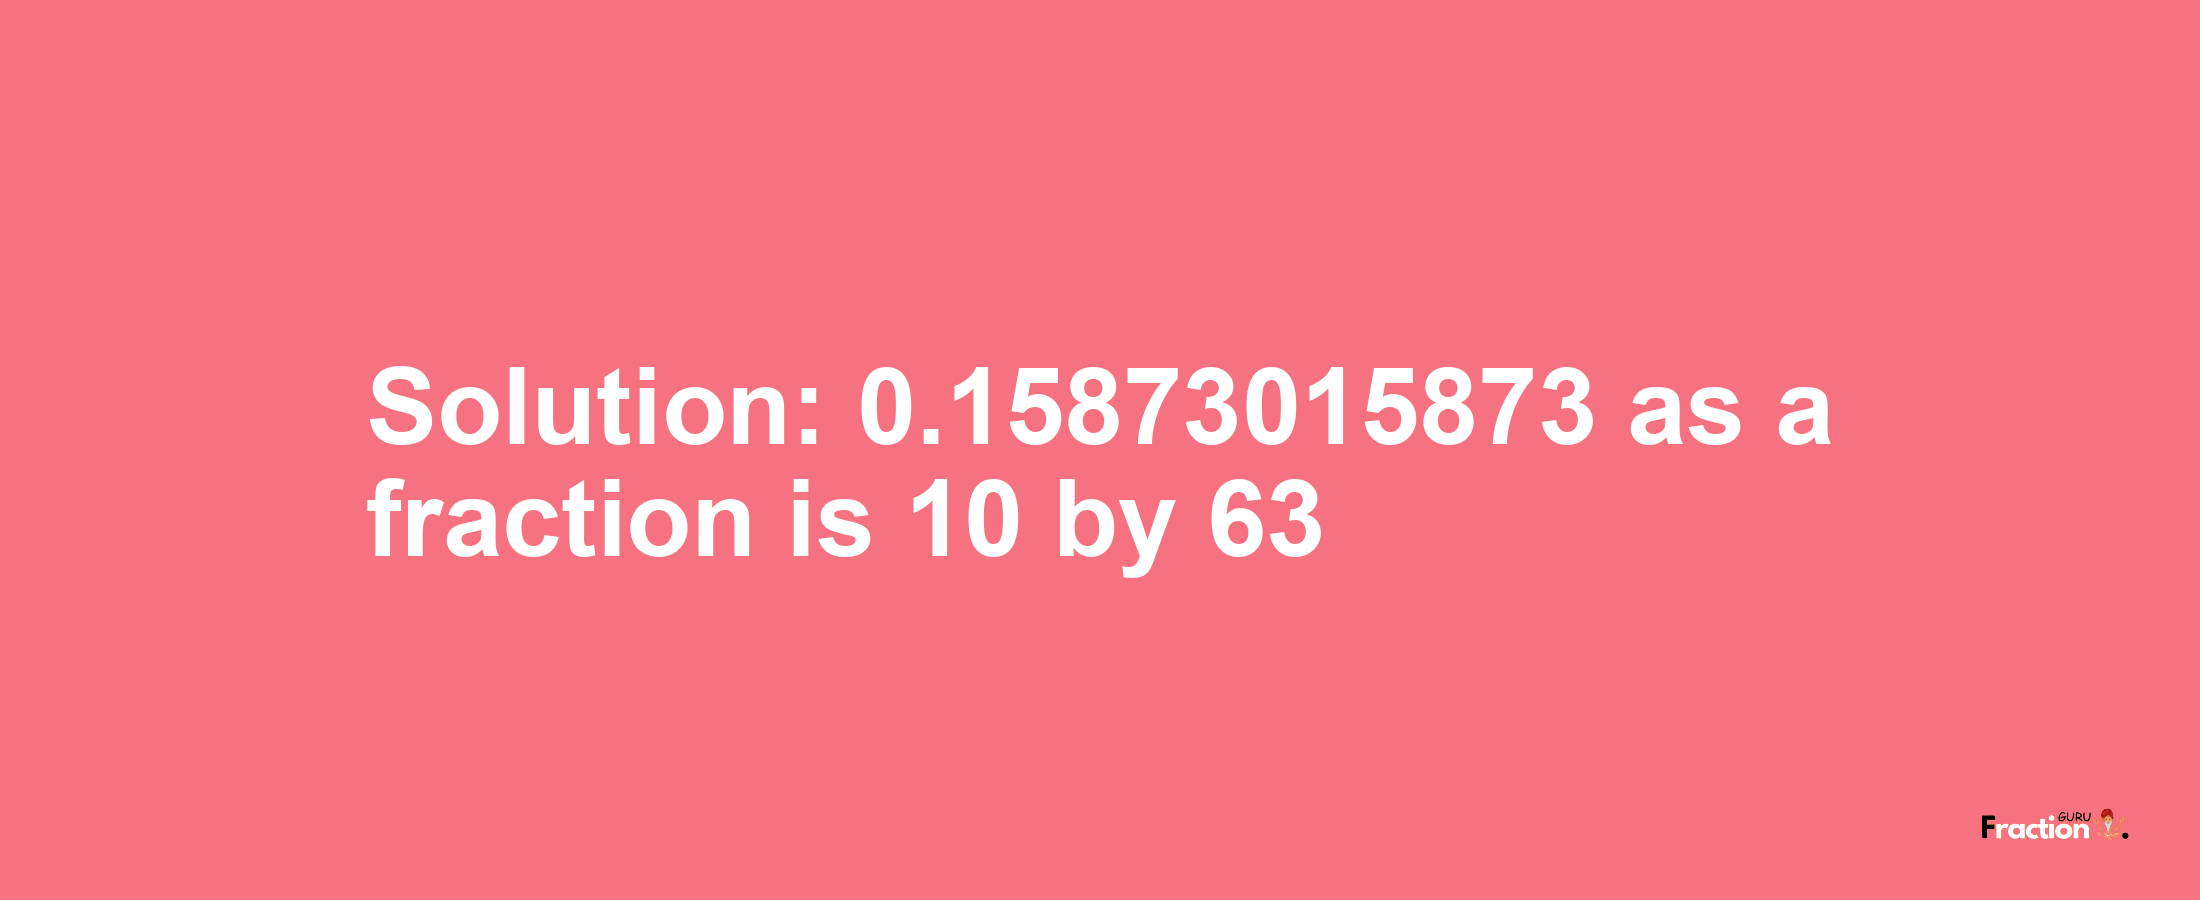 Solution:0.15873015873 as a fraction is 10/63